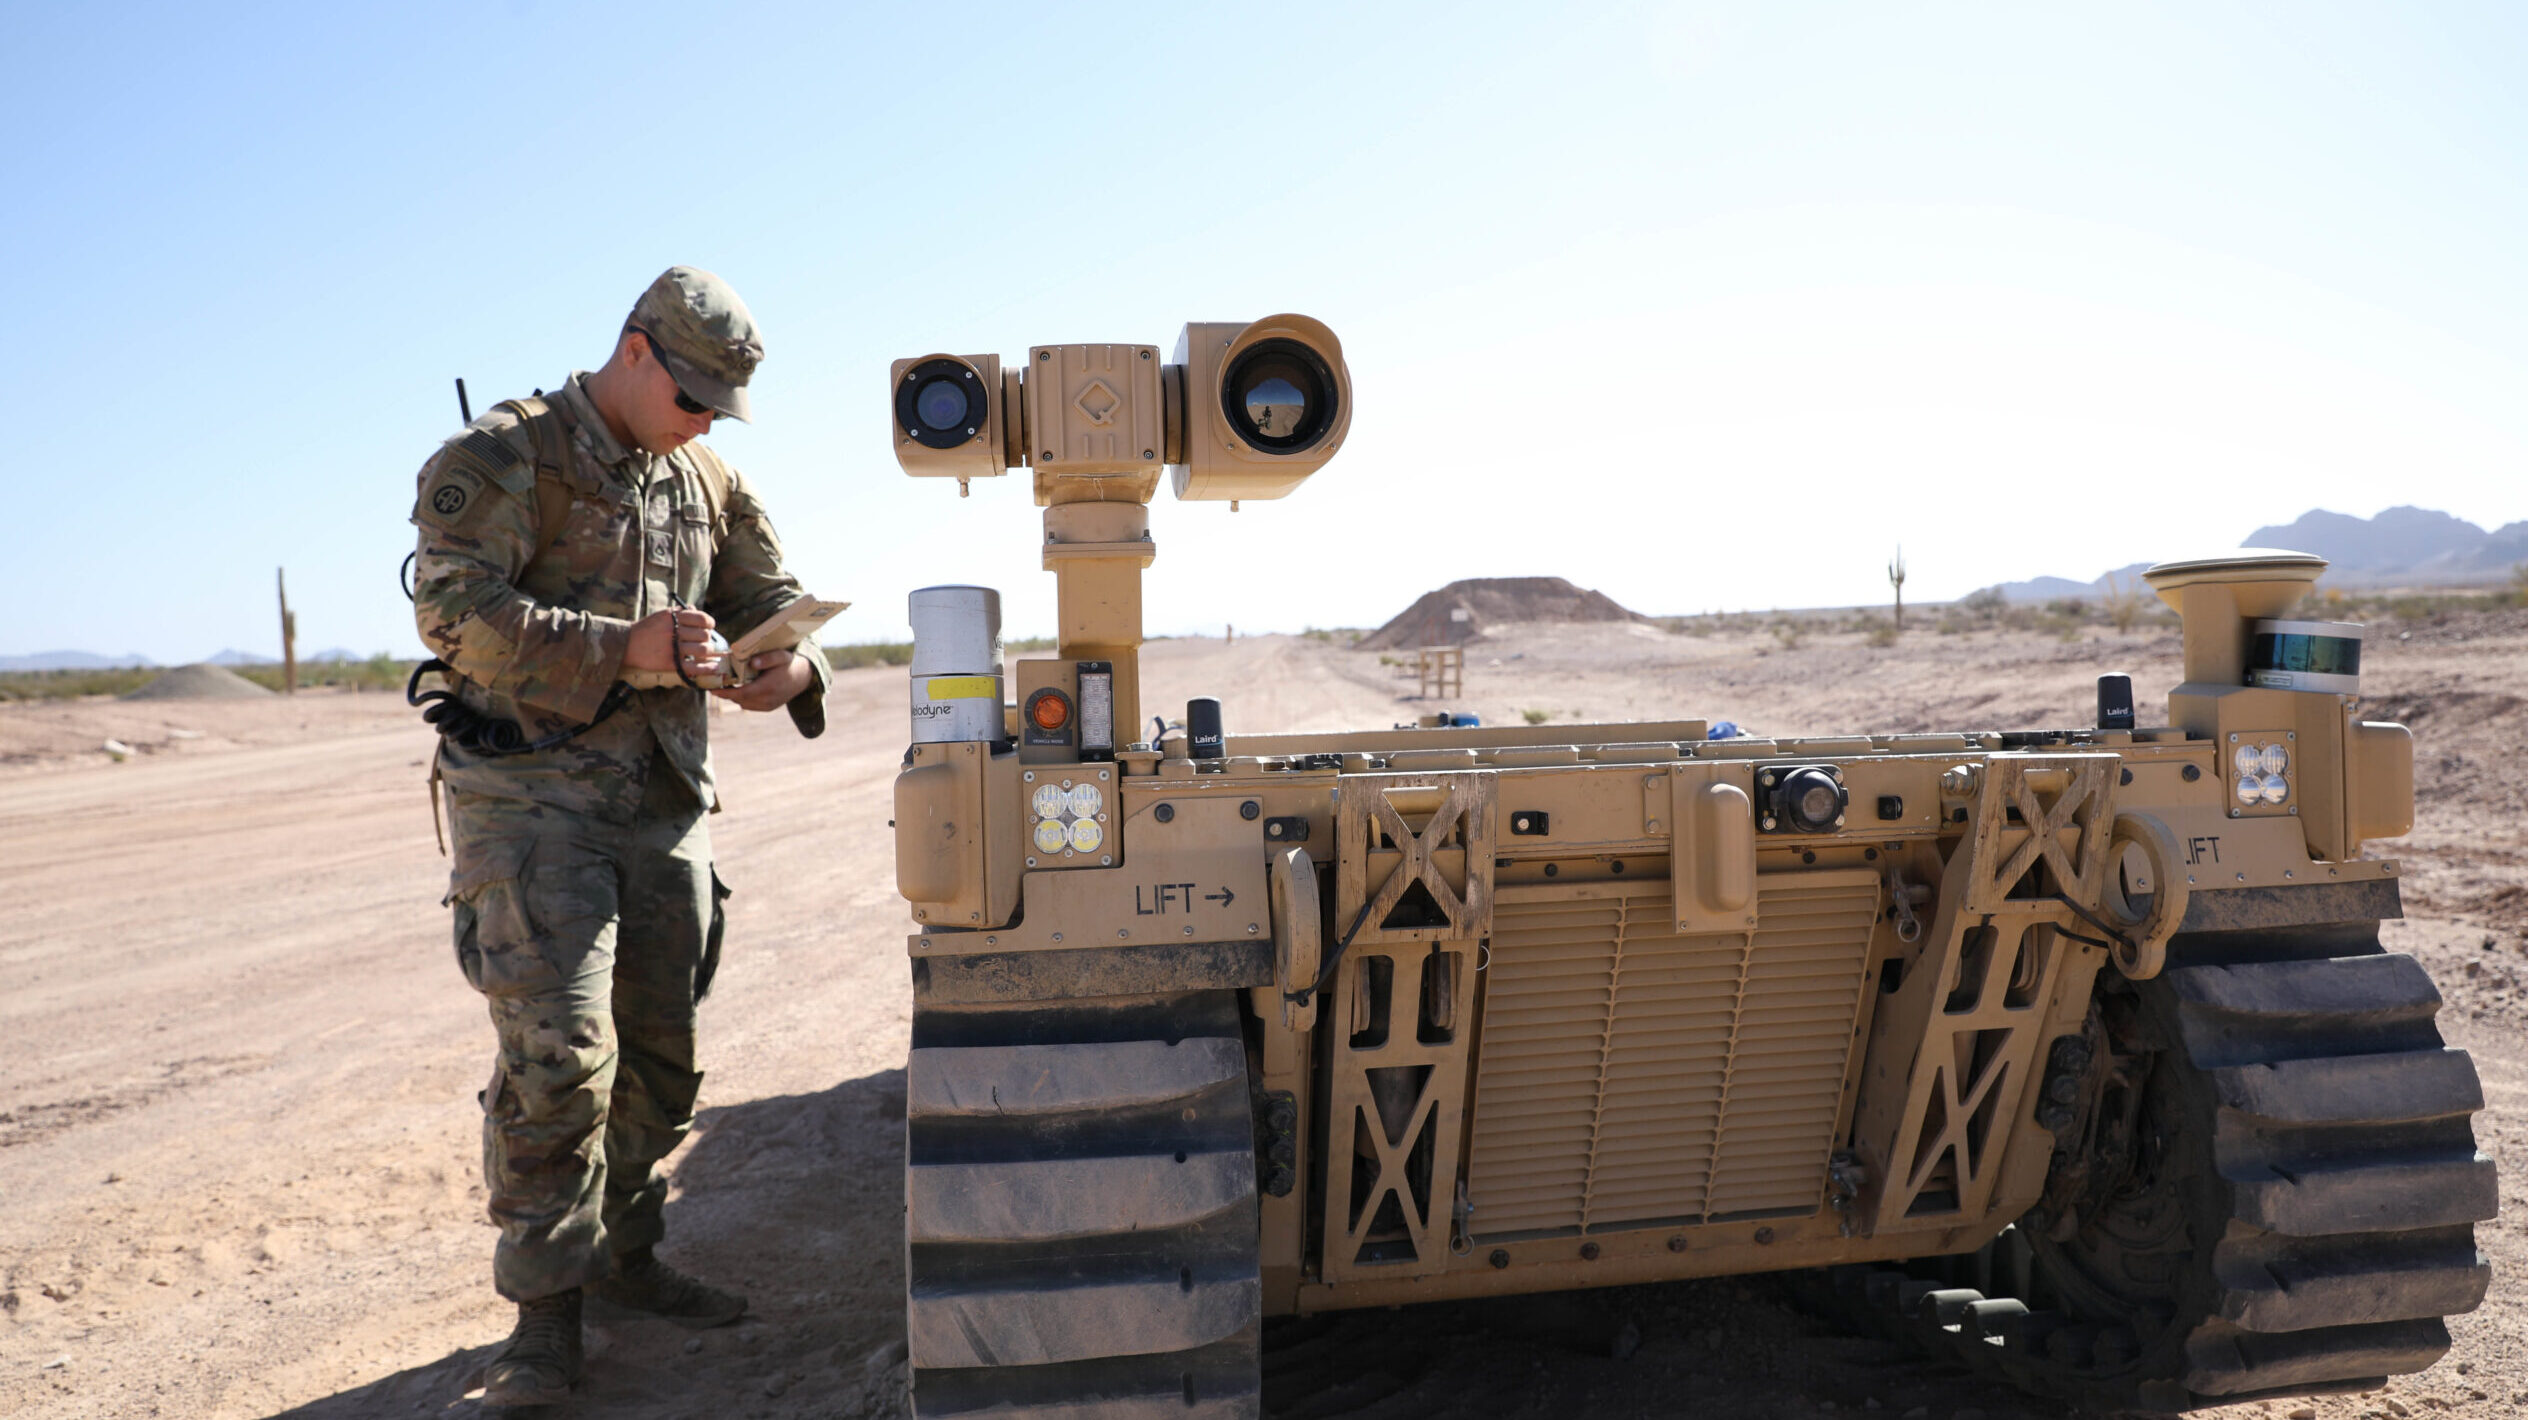 Project Convergence 21 – Tactical Robotic Controller [Image 3 of 6]